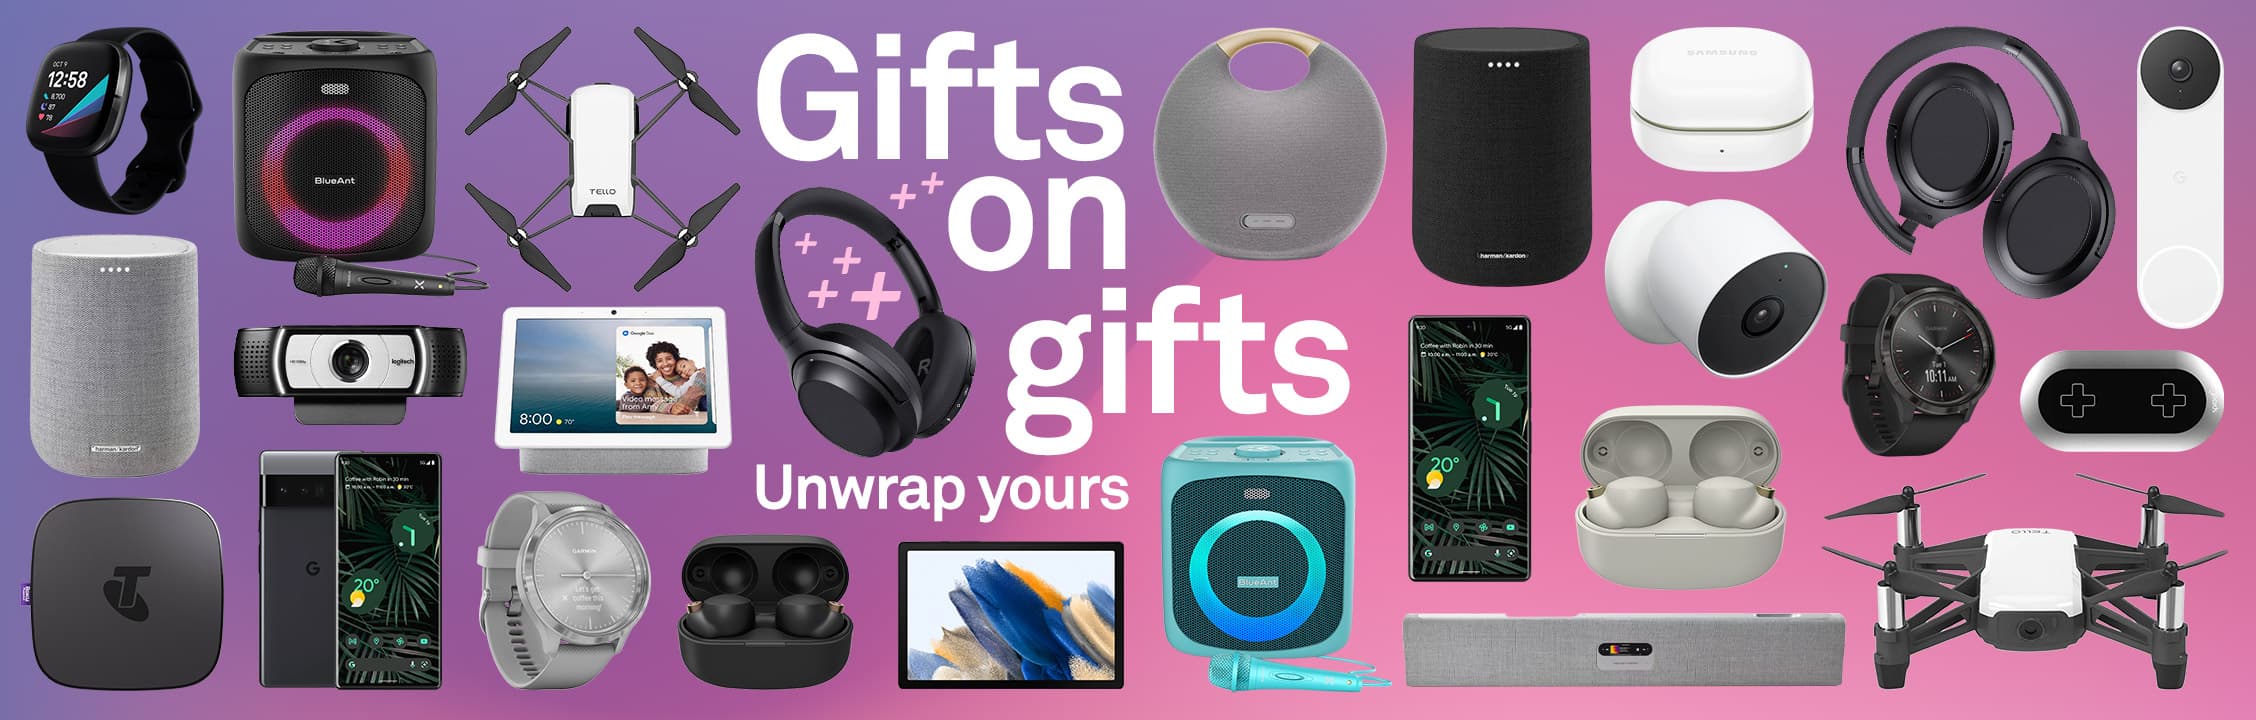 Unwrap a gift with your Telstra Plus account